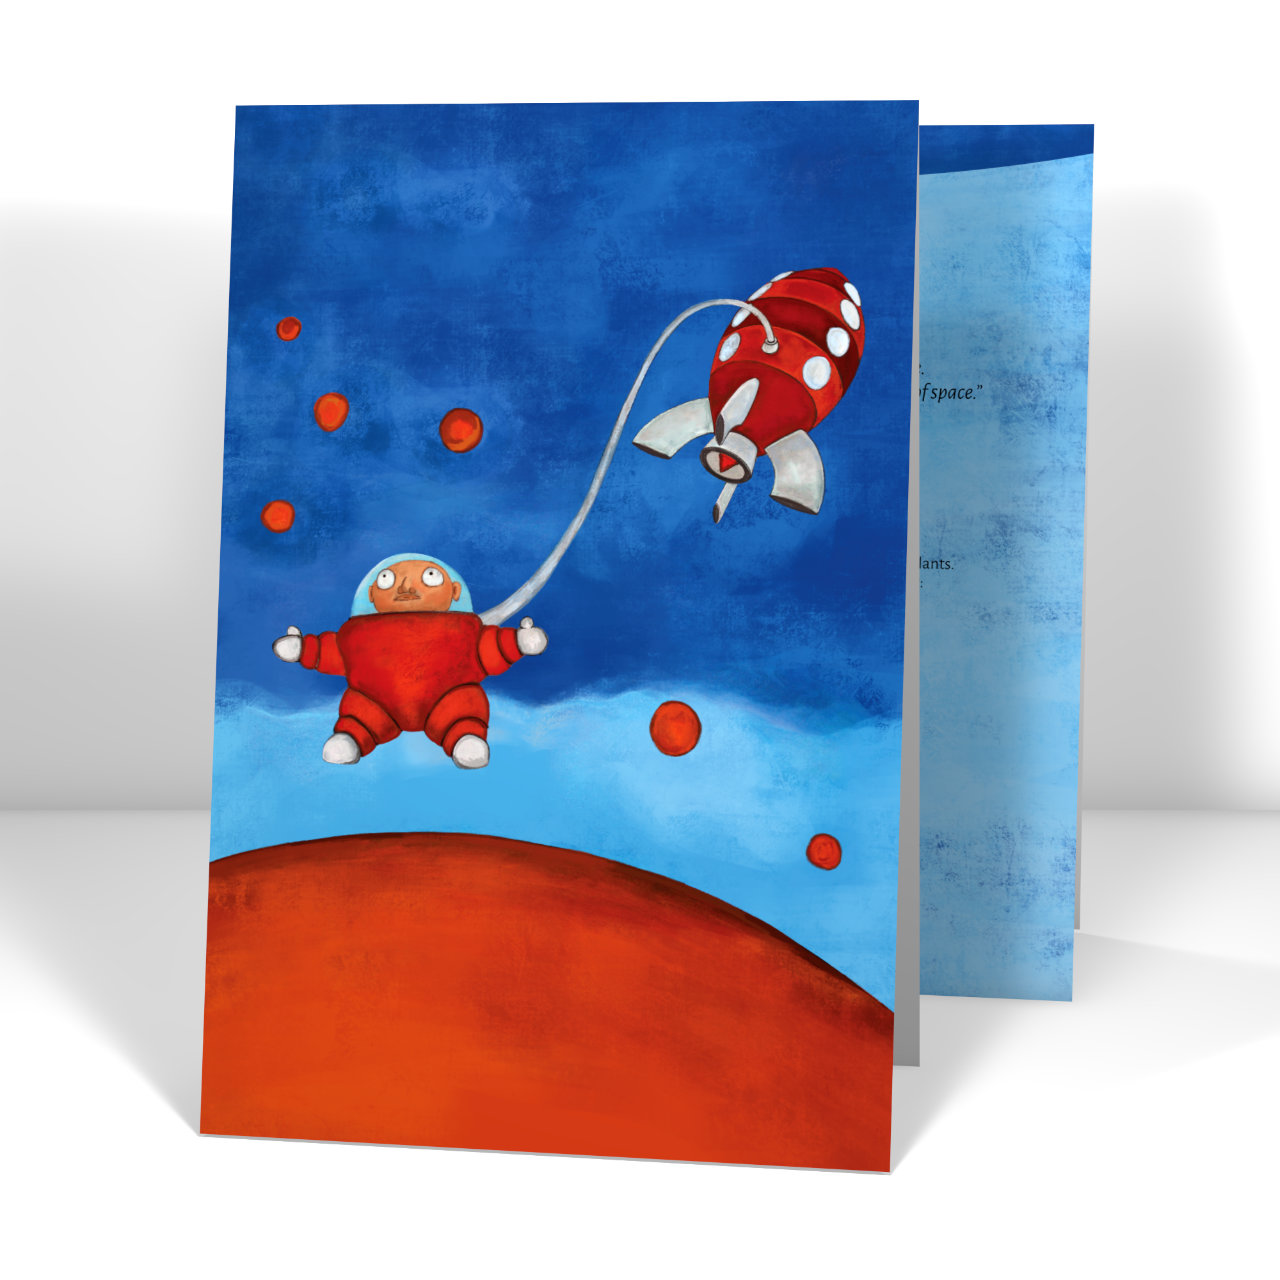 Painting of a character flying in the middle of space with a spaceship in the background.